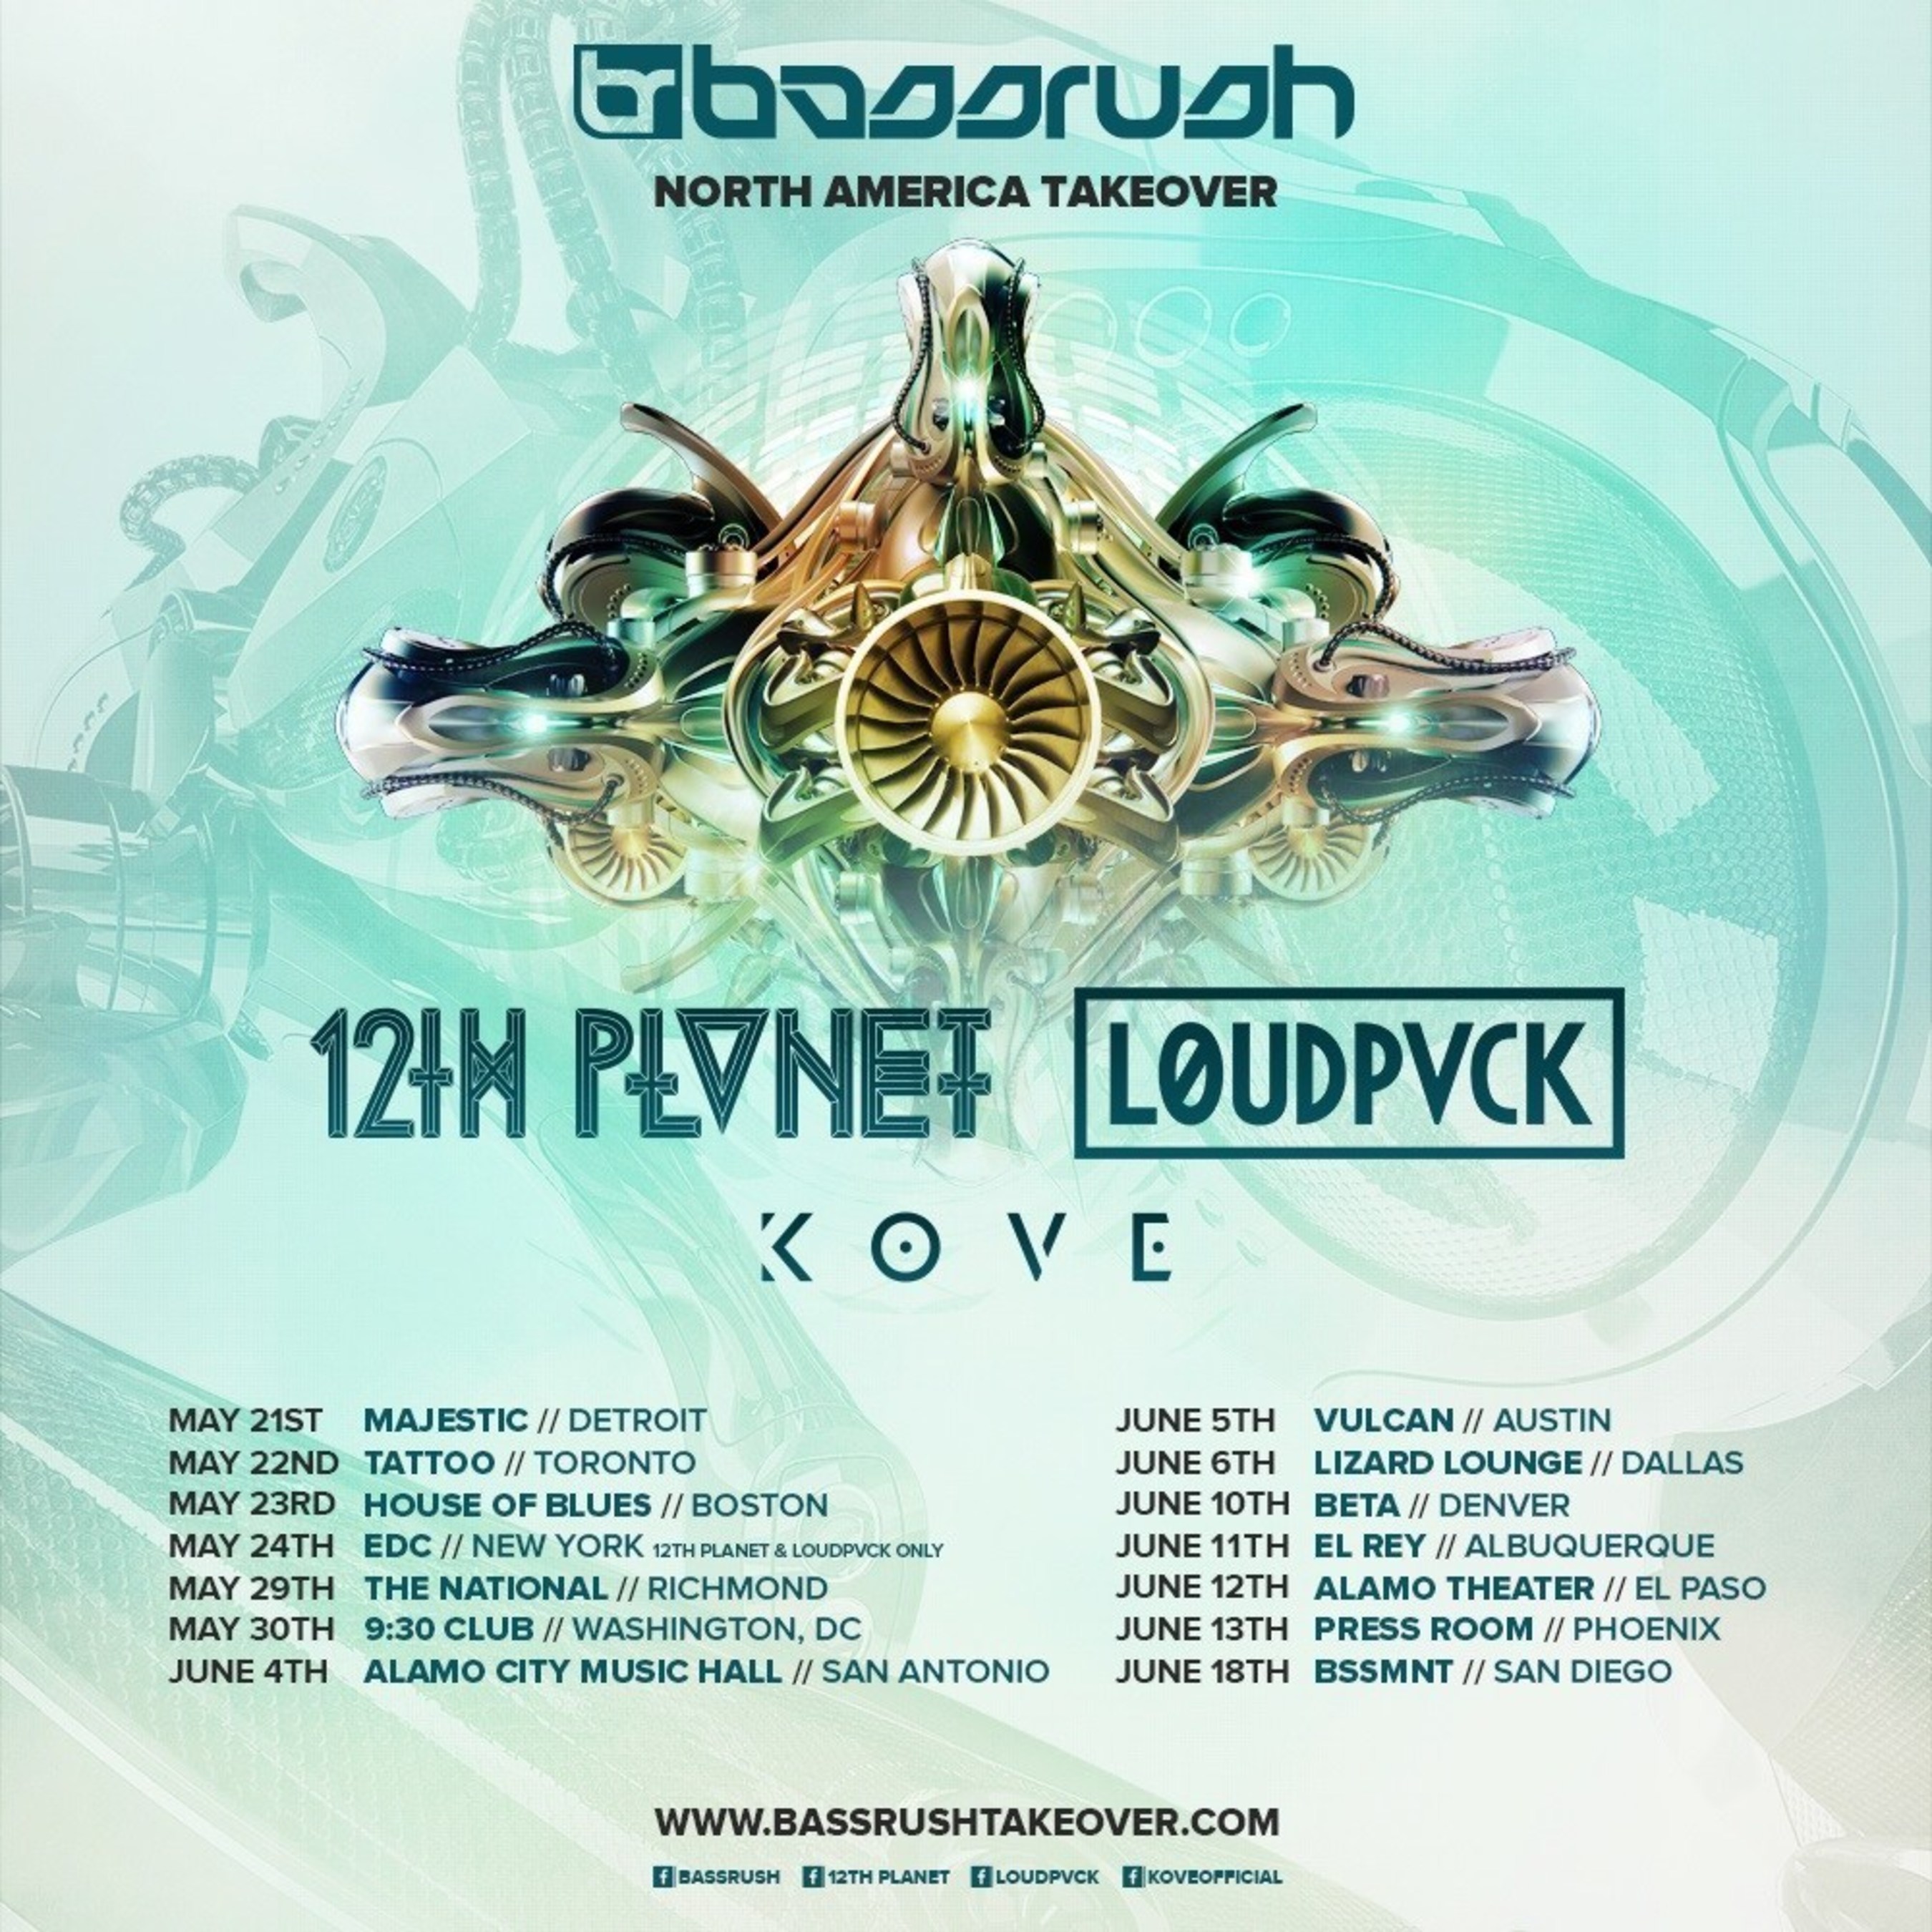 INSOMNIAC ANNOUNCES FIRST EVER BASSRUSH TOUR FEATURING 12TH PLANET, LOUDPVCK AND KOVE